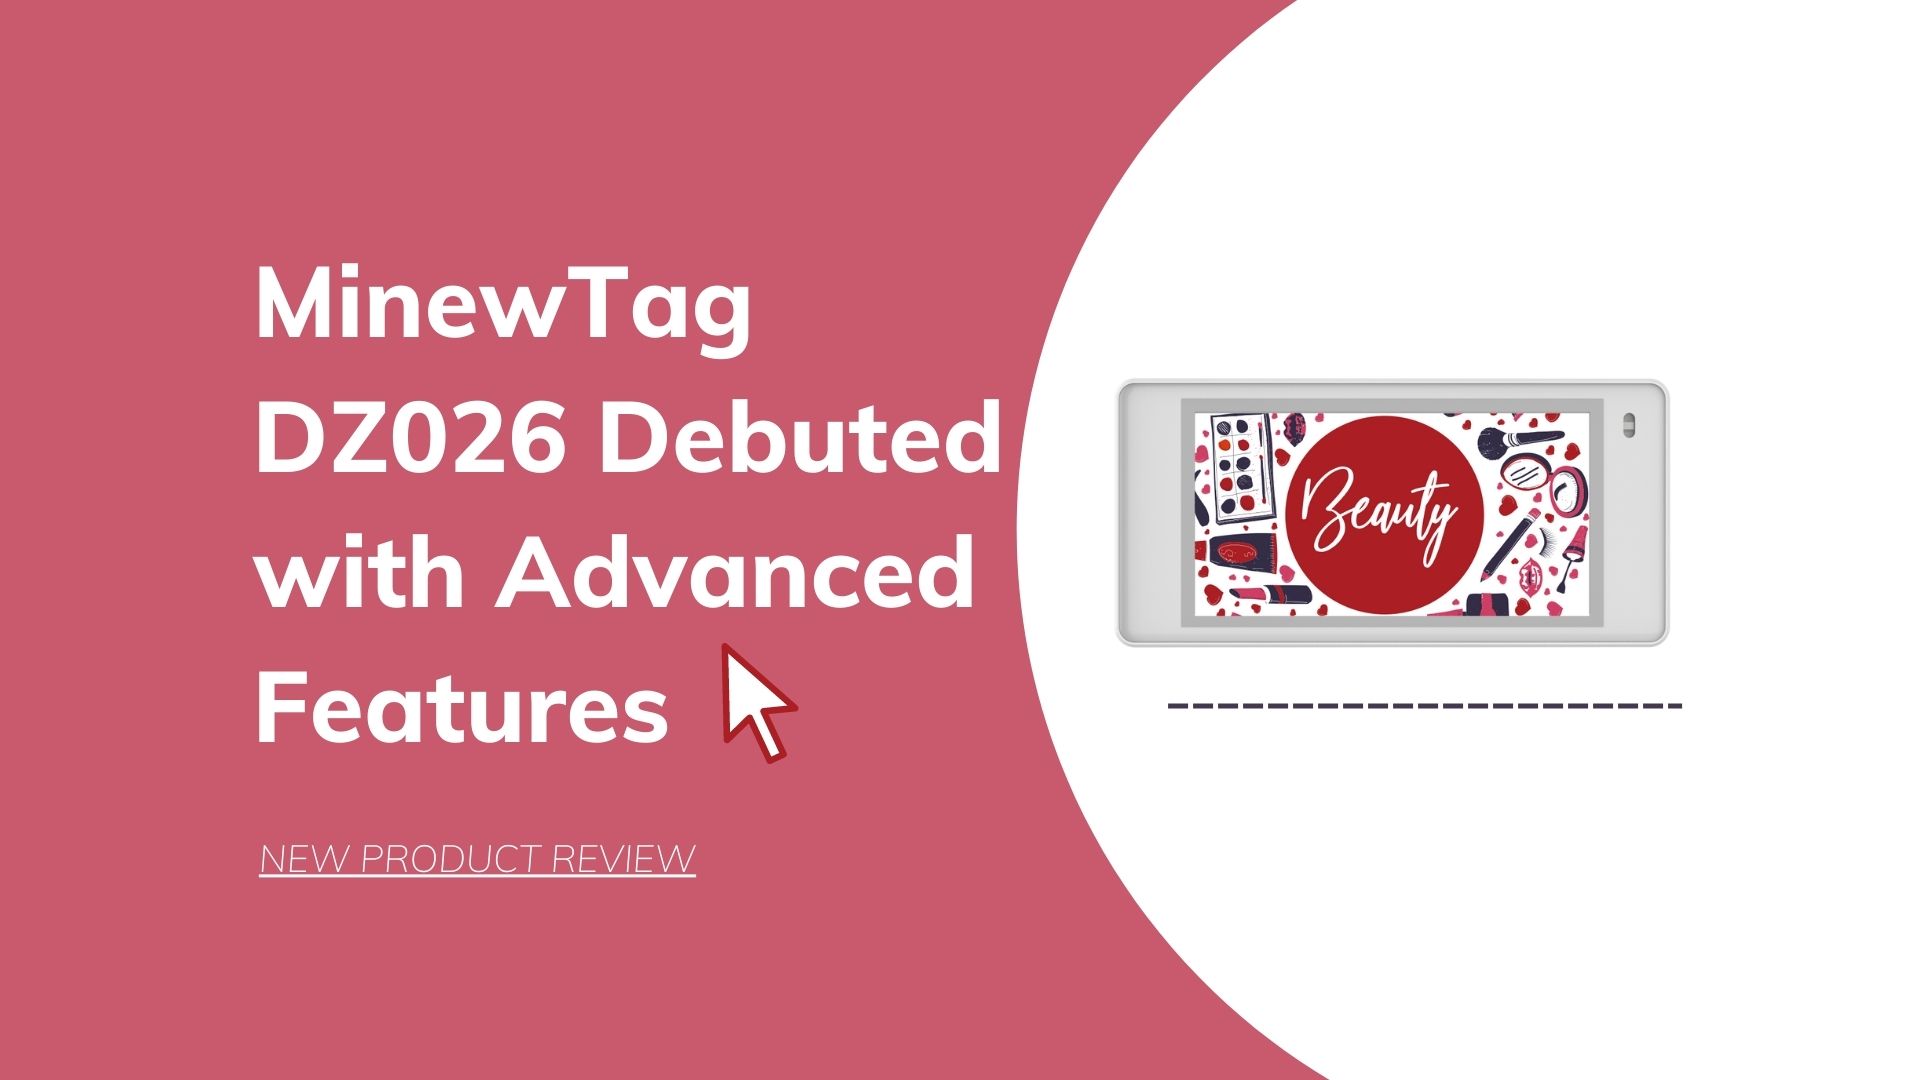 MinewTag DZ026 Debuted with Advanced Features